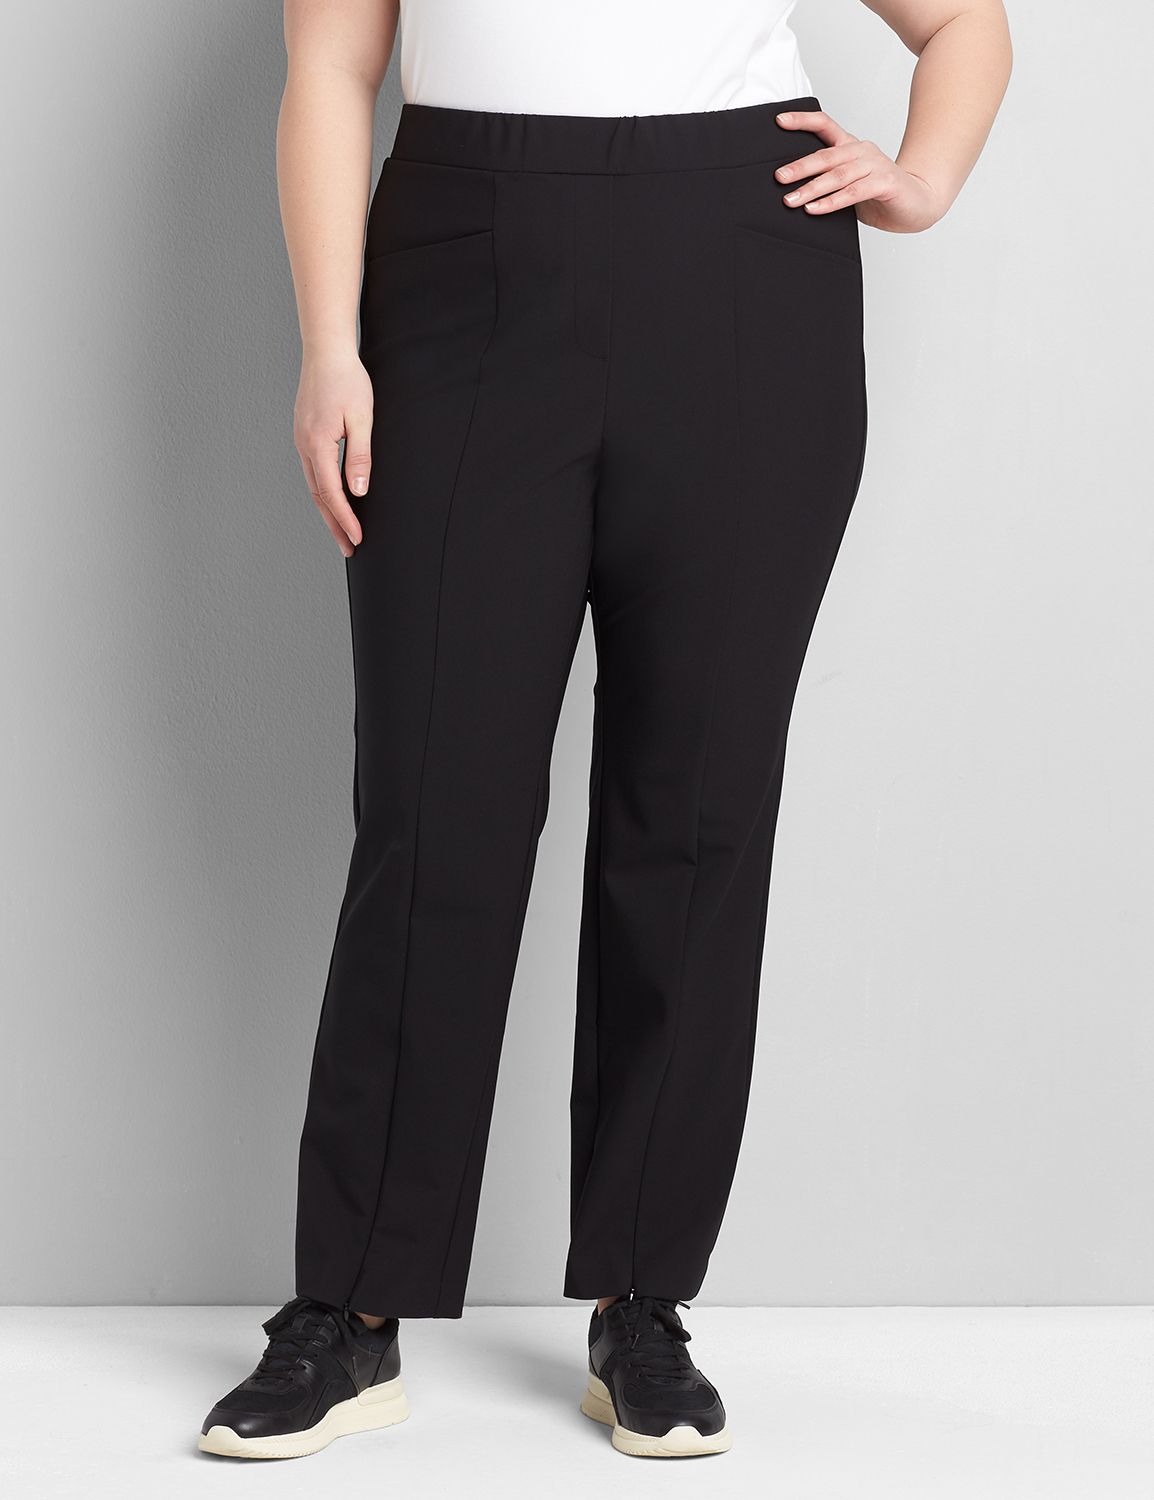 On-The-Go Straight Pant With Zip-Front Hem | LaneBryant